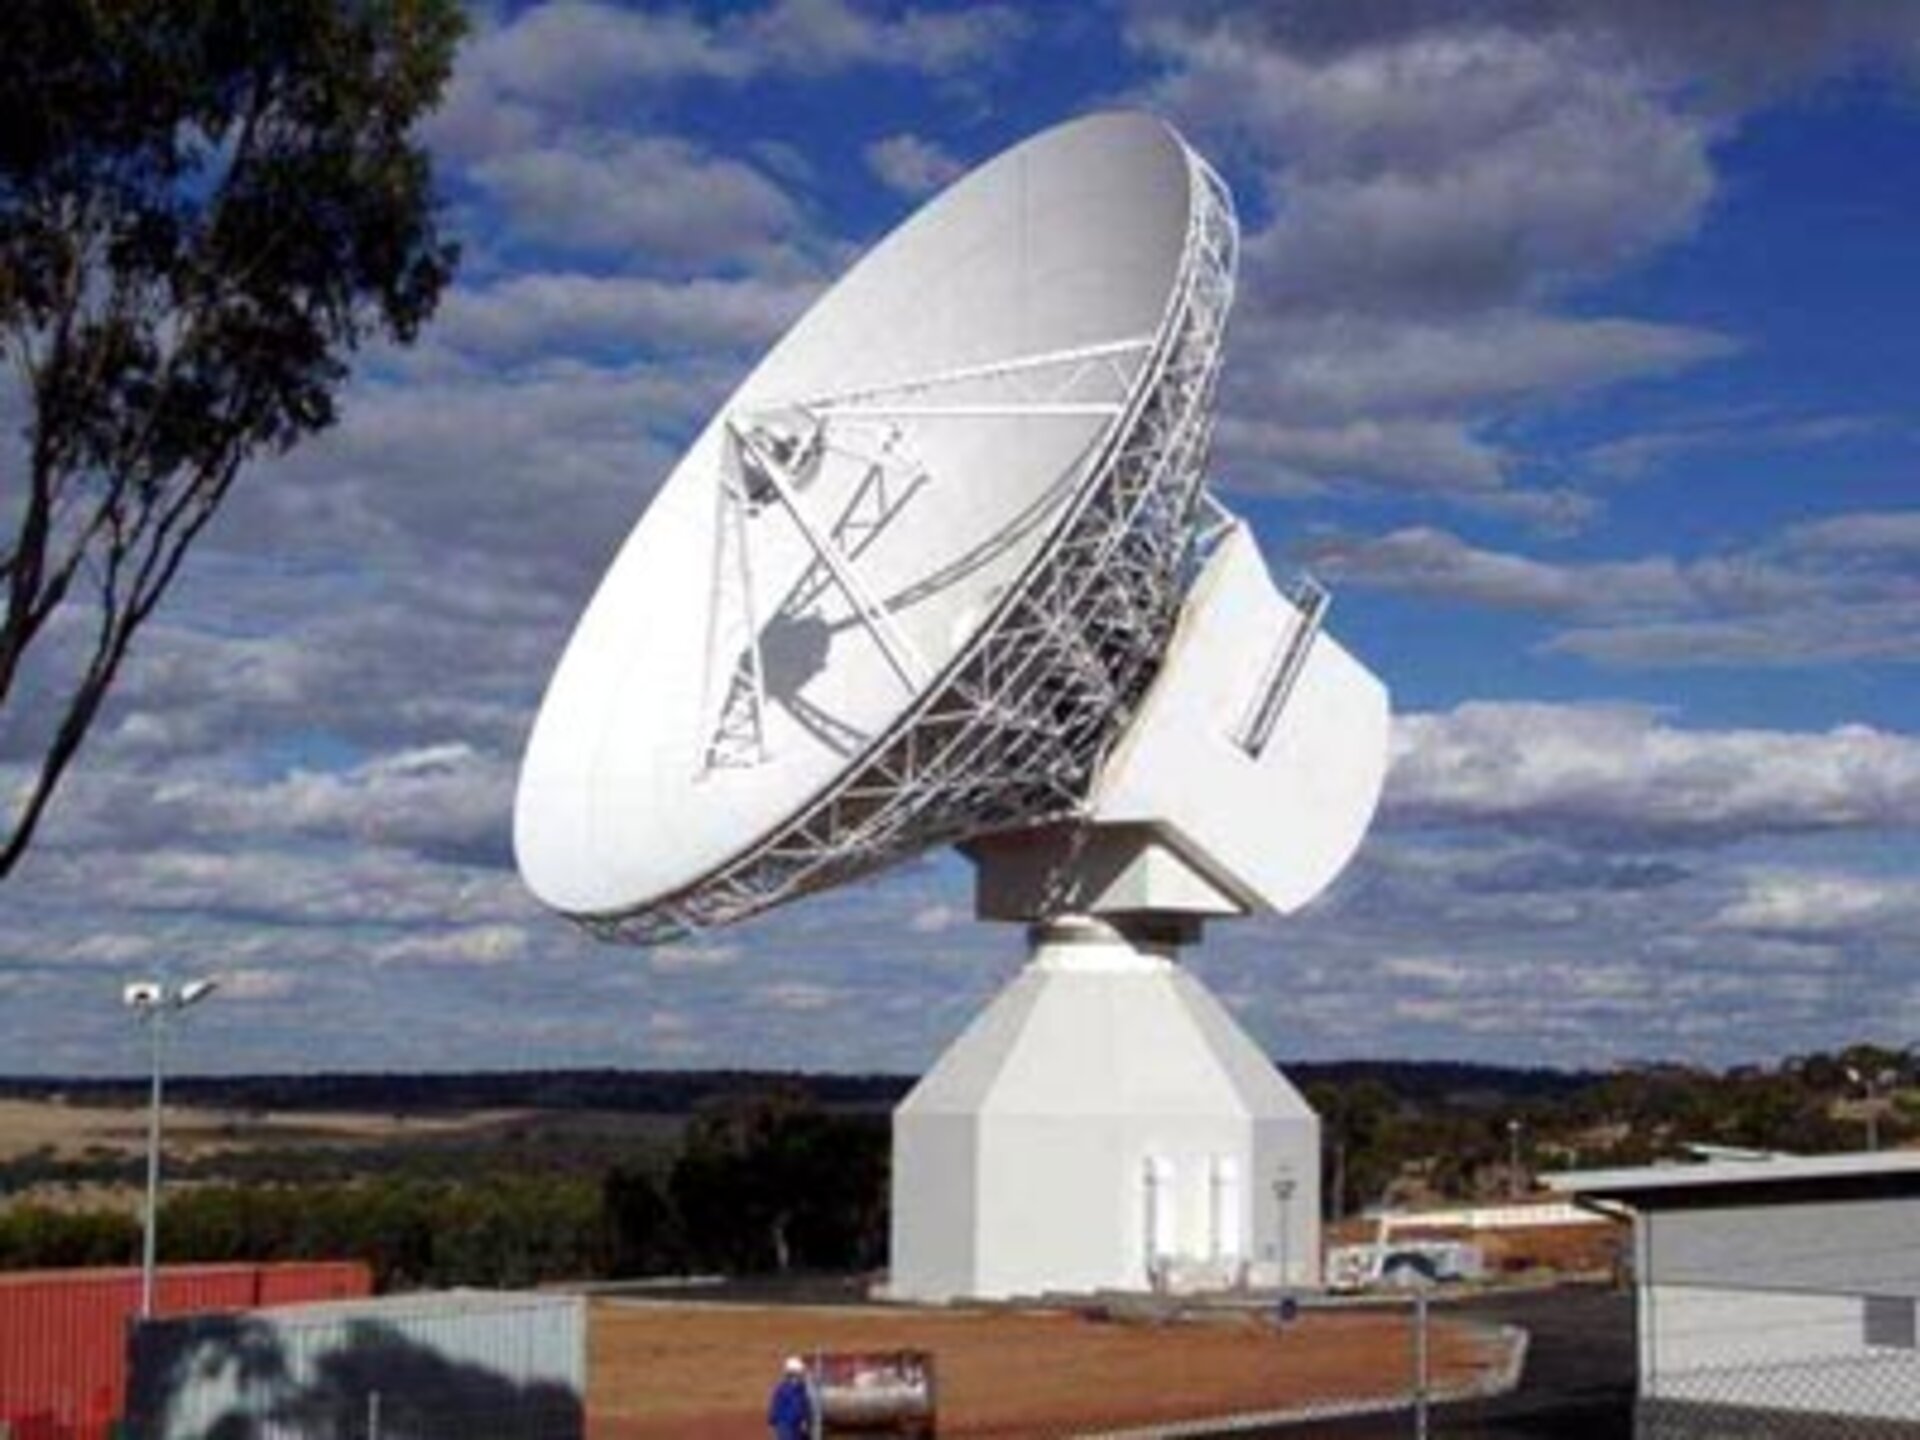 New Norcia: ESA's first 35m deep-space station